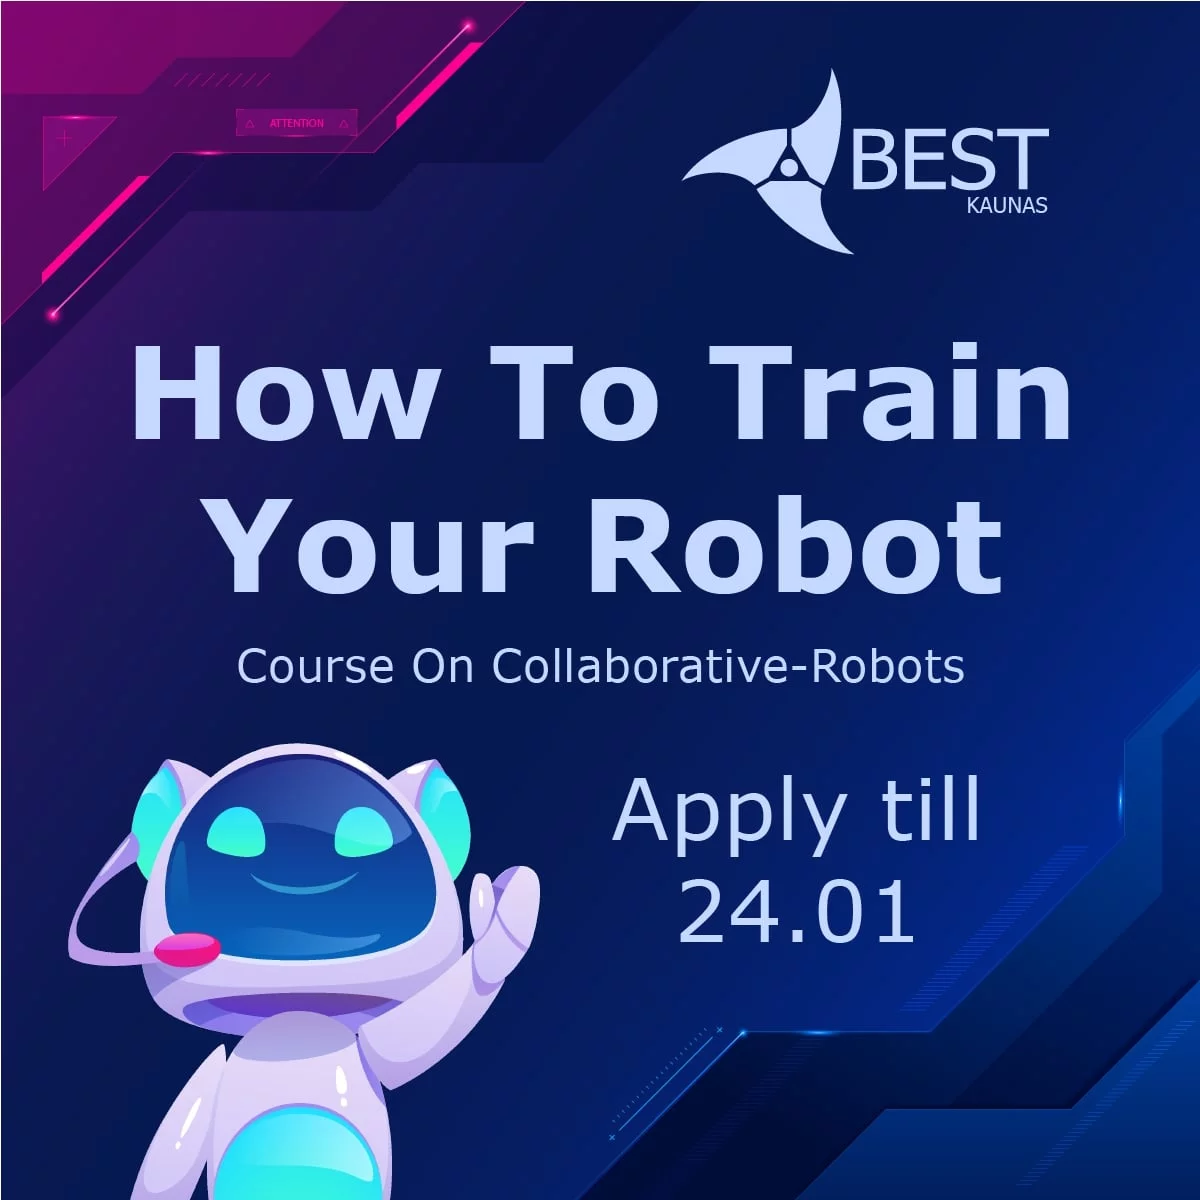 How To Train Your Robots - Image Presentation